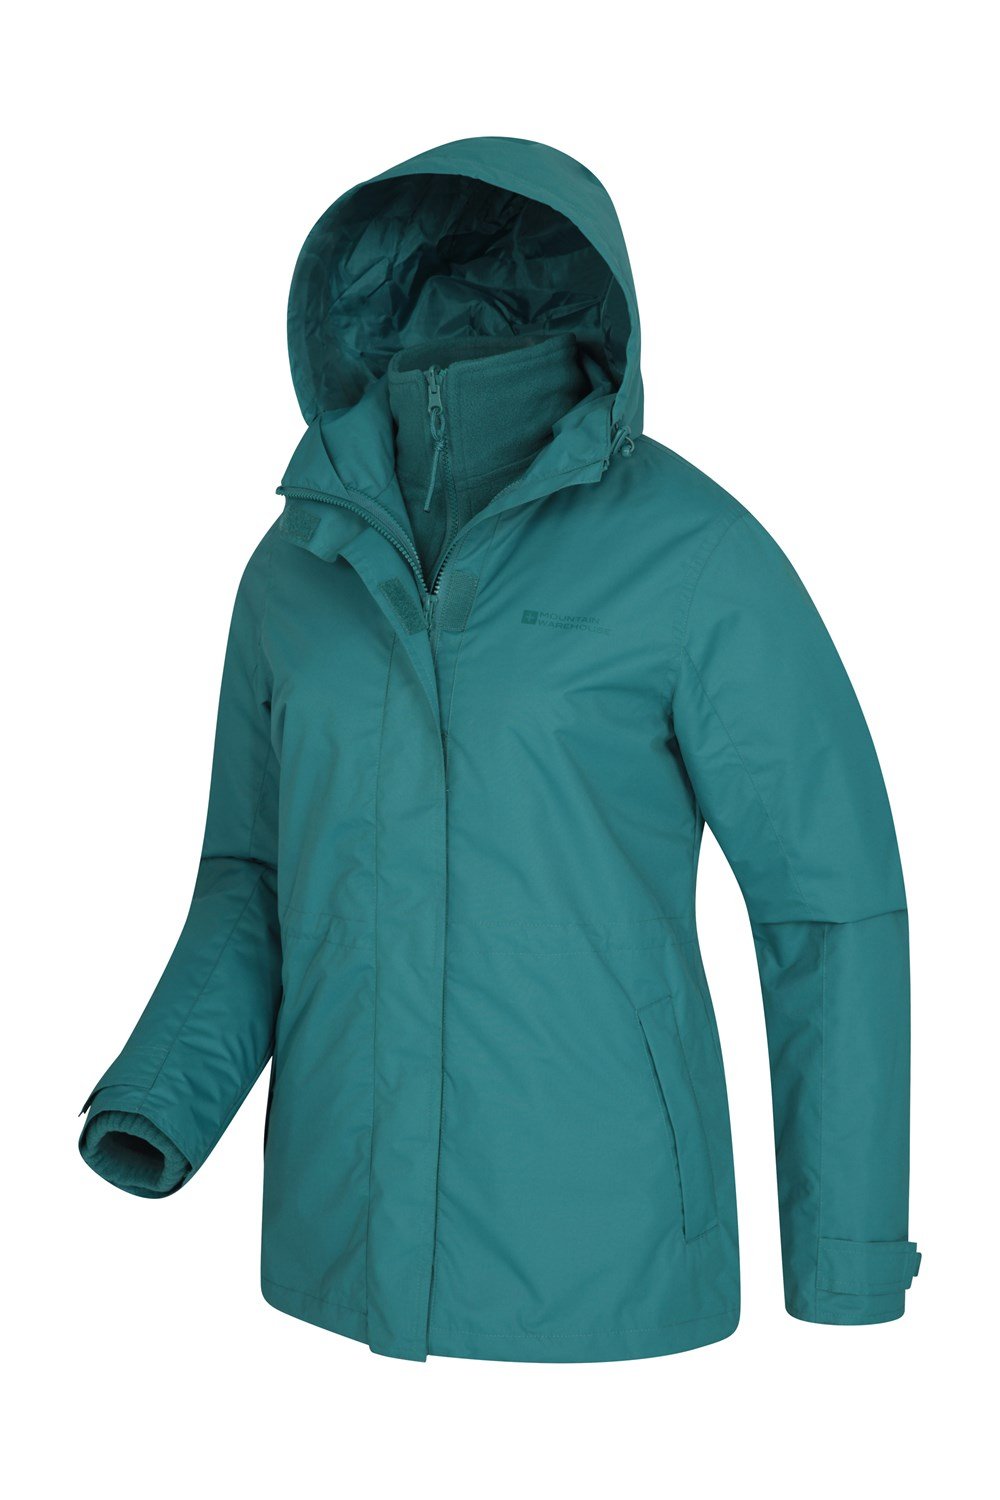 Mountain Warehouse Womens 3 in 1 Jacket Water Resistant Triclimate Coat ...